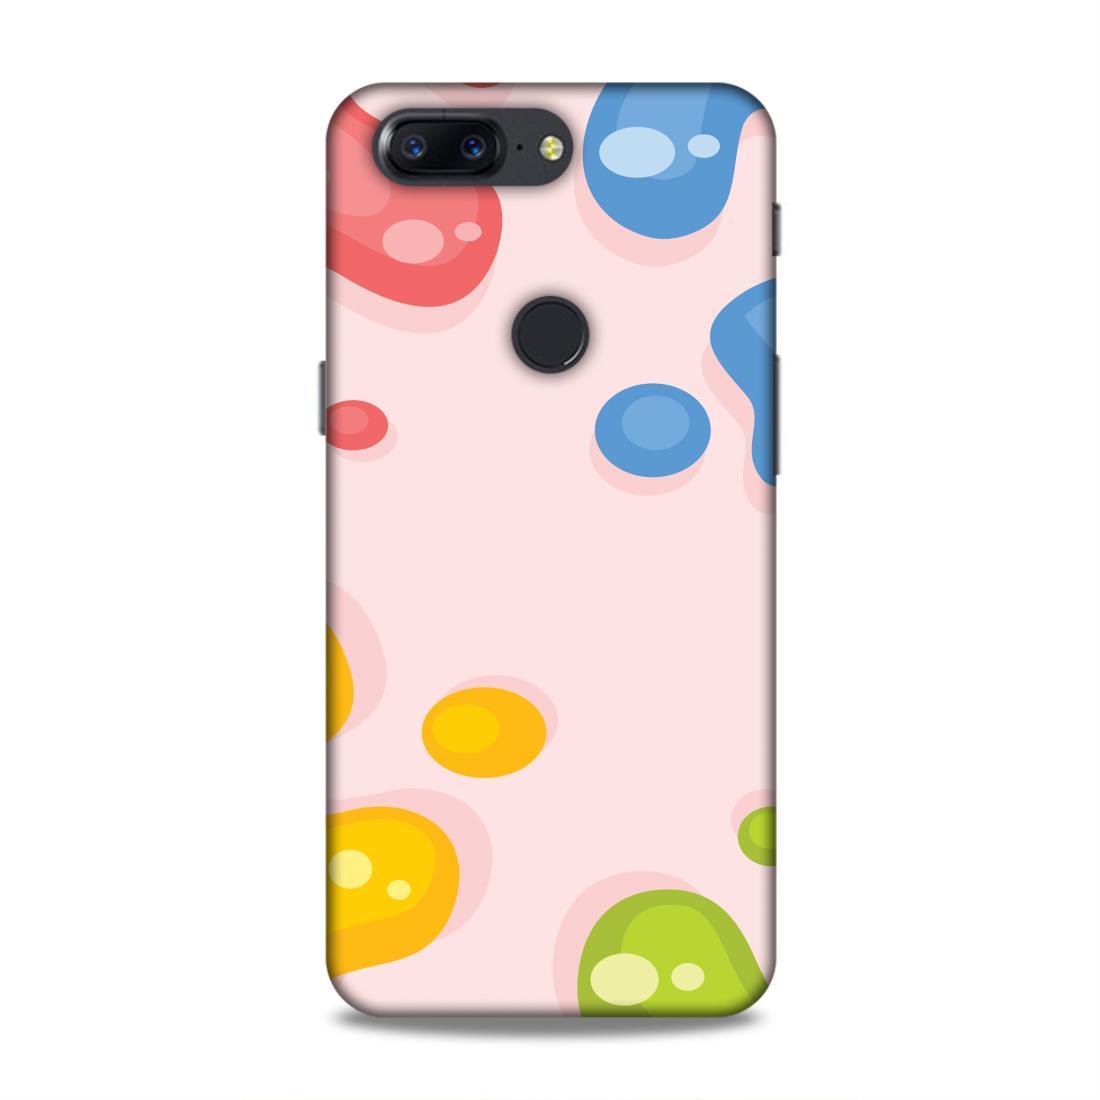 Funky Colour OnePlus 5T Mobile Back Cover